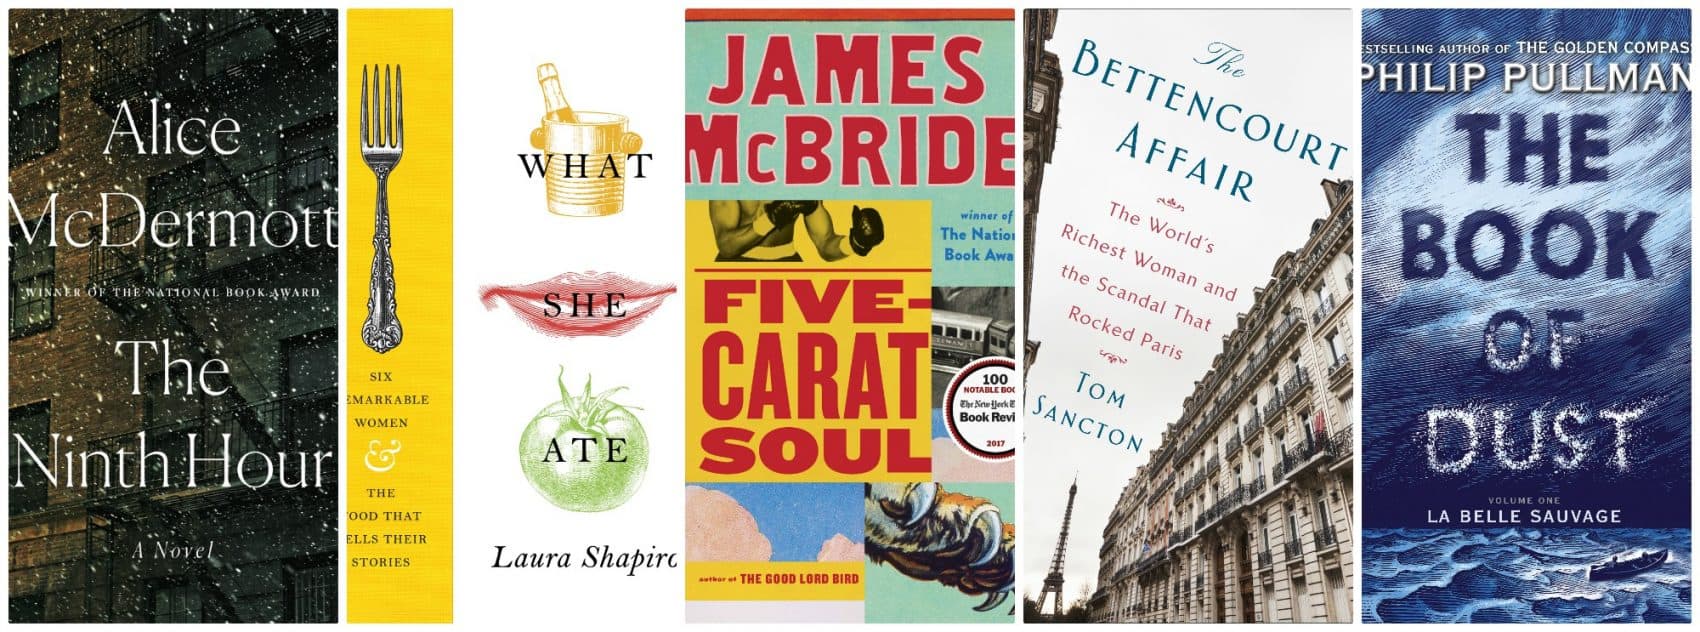 Five recommended titles from NPR Books editor Petra Mayer, to consider adding to your shopping list this holiday season. (Courtesy of the publishers)